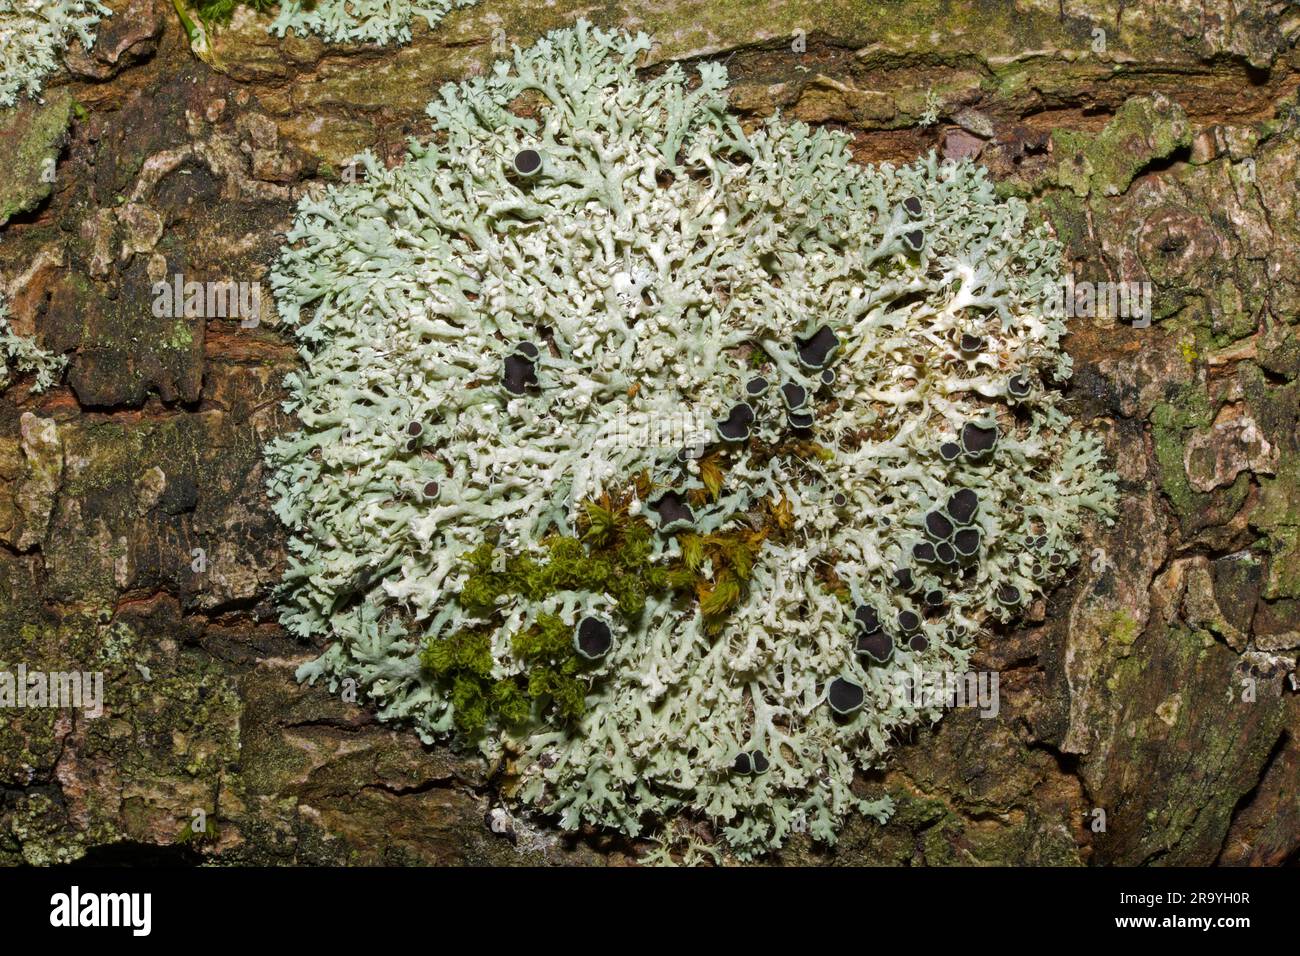 Physcia tenella is a foliose lichen found on nutrient-rich branches and twigs and occasionally on rocks. It has been recorded across the world. Stock Photo